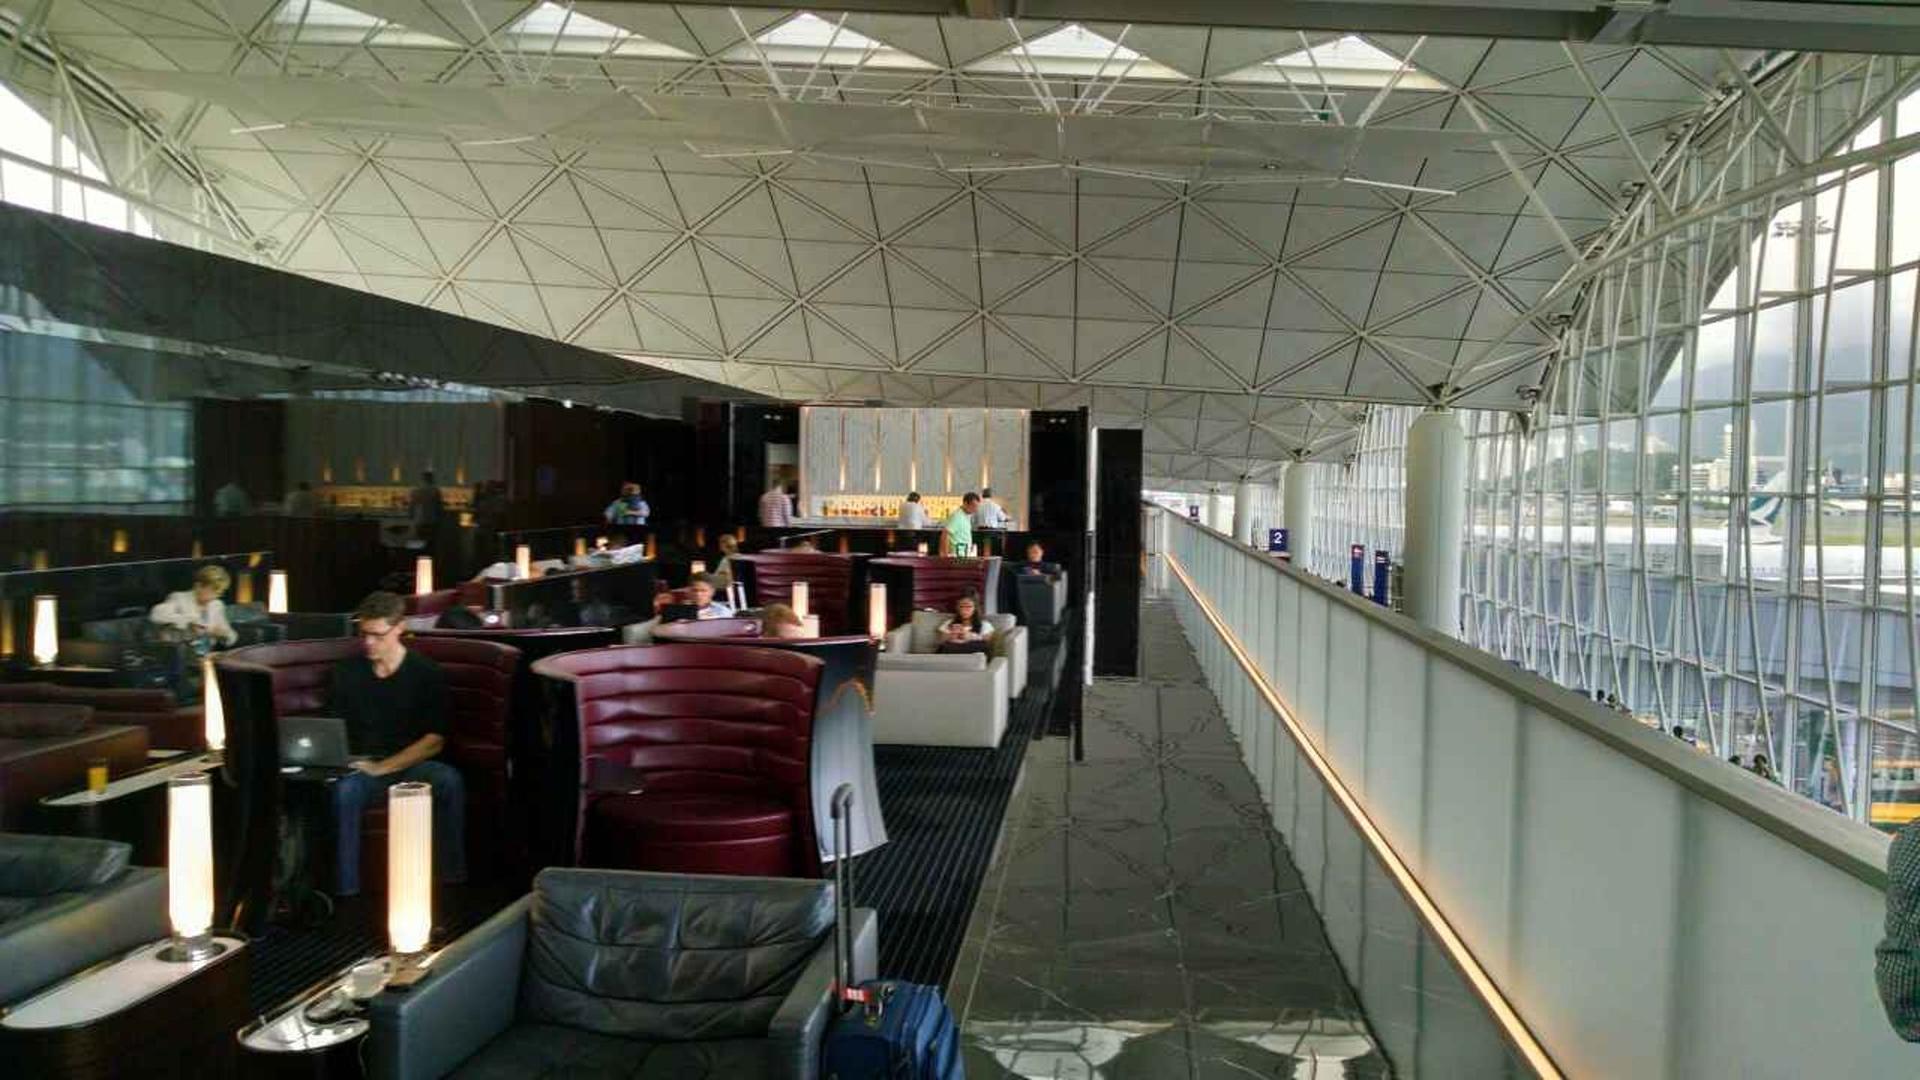 Cathay Pacific The Wing First Class Lounge image 61 of 89